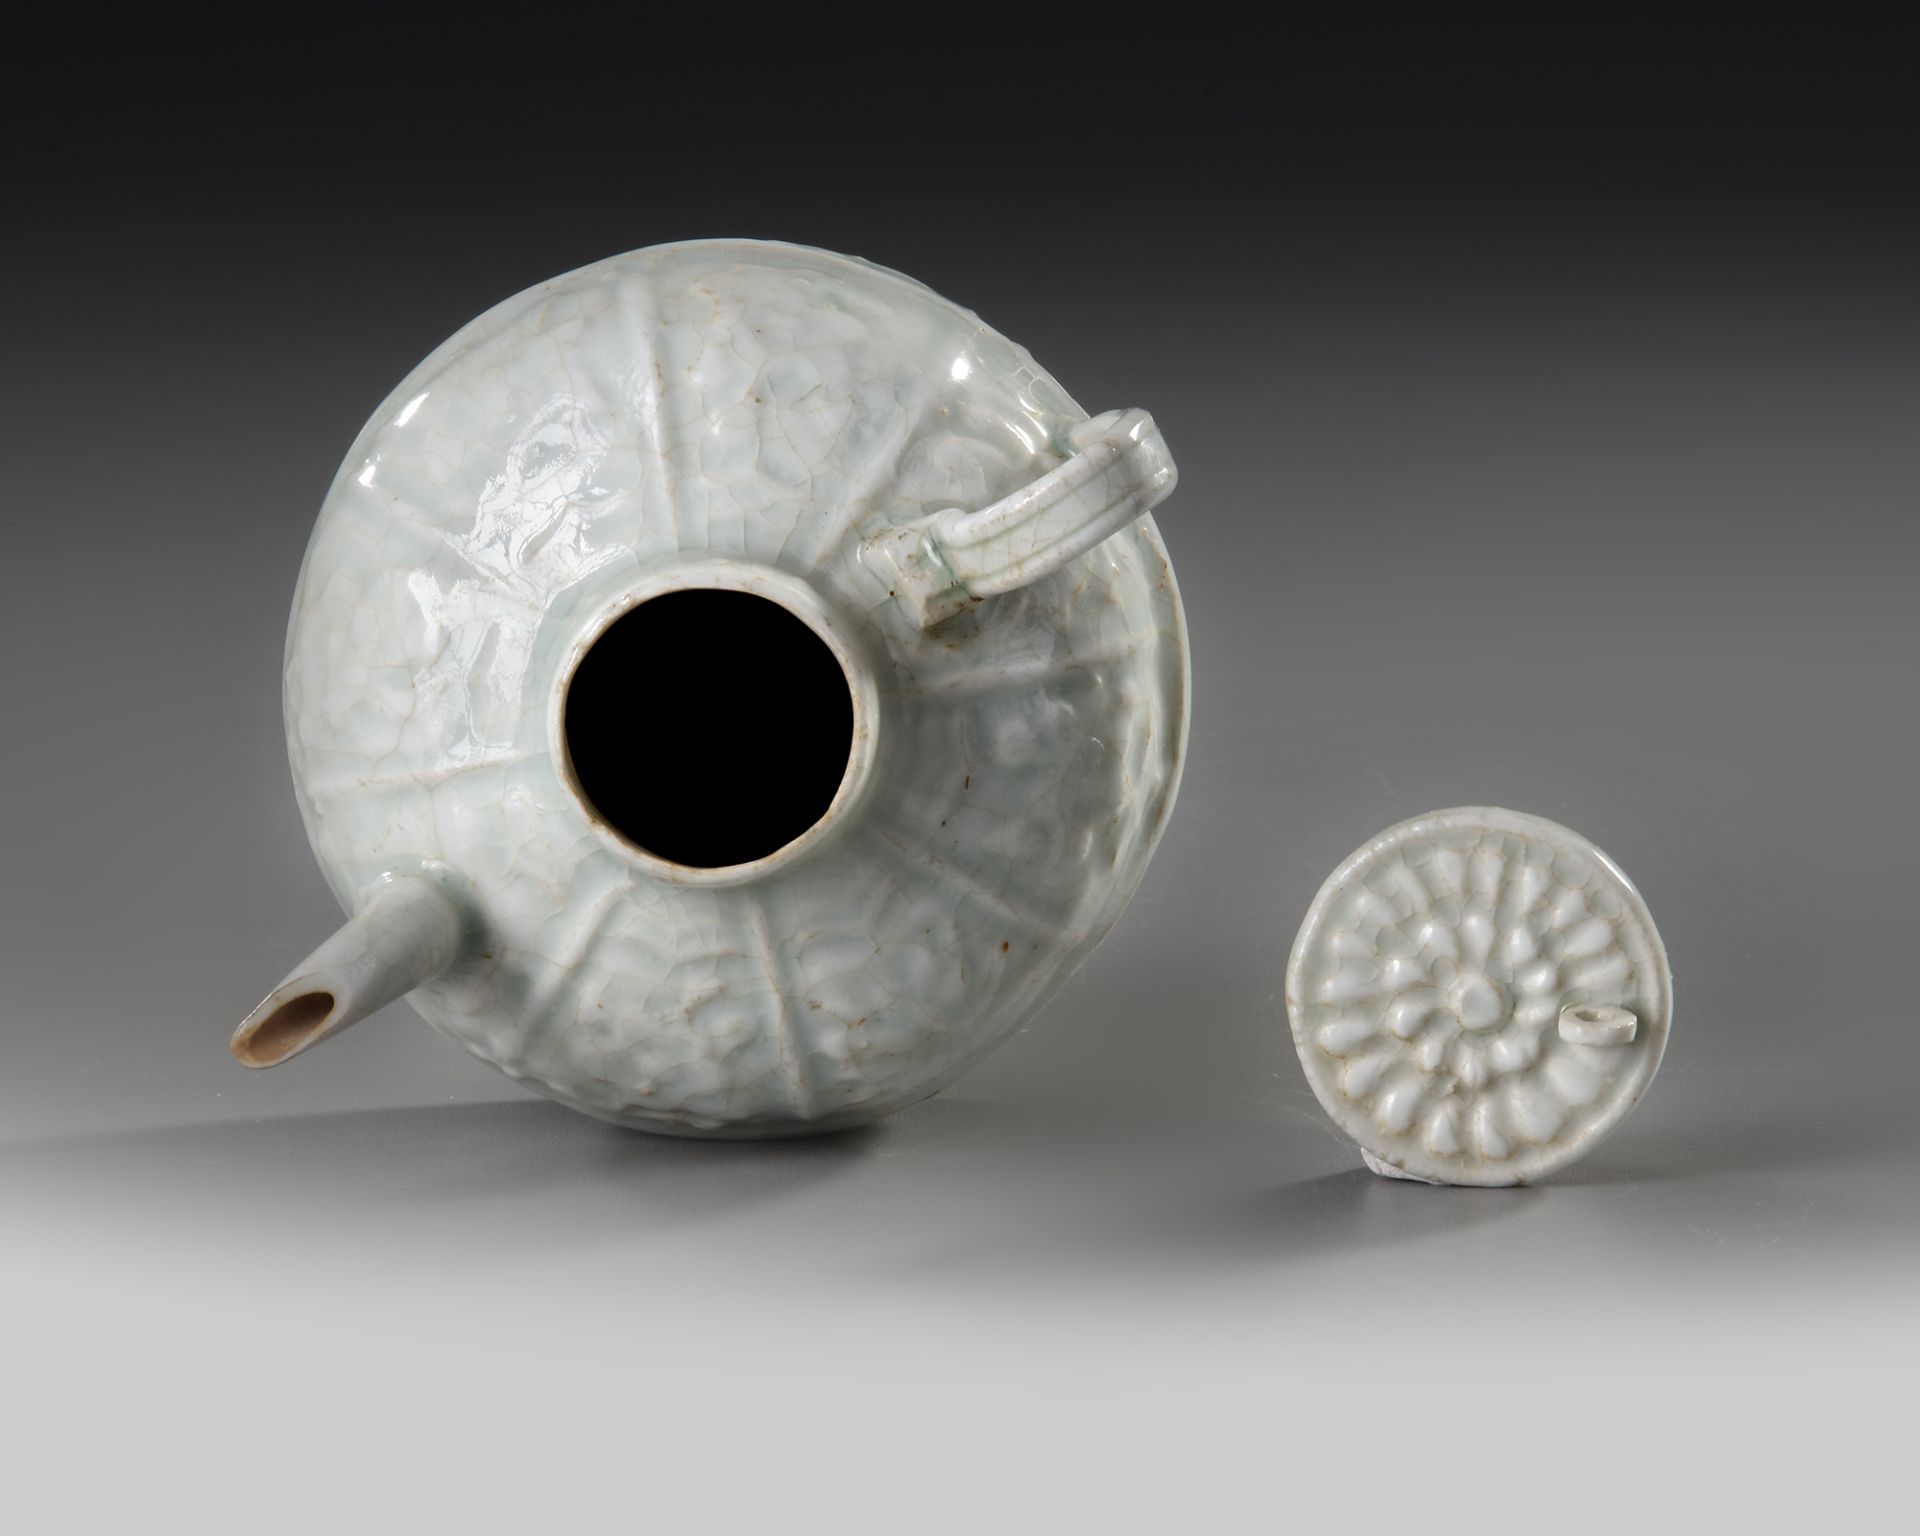 A SMALL CHINESE QINGBAI EWER, SONG DYNASTY (960-1279) - Image 4 of 5